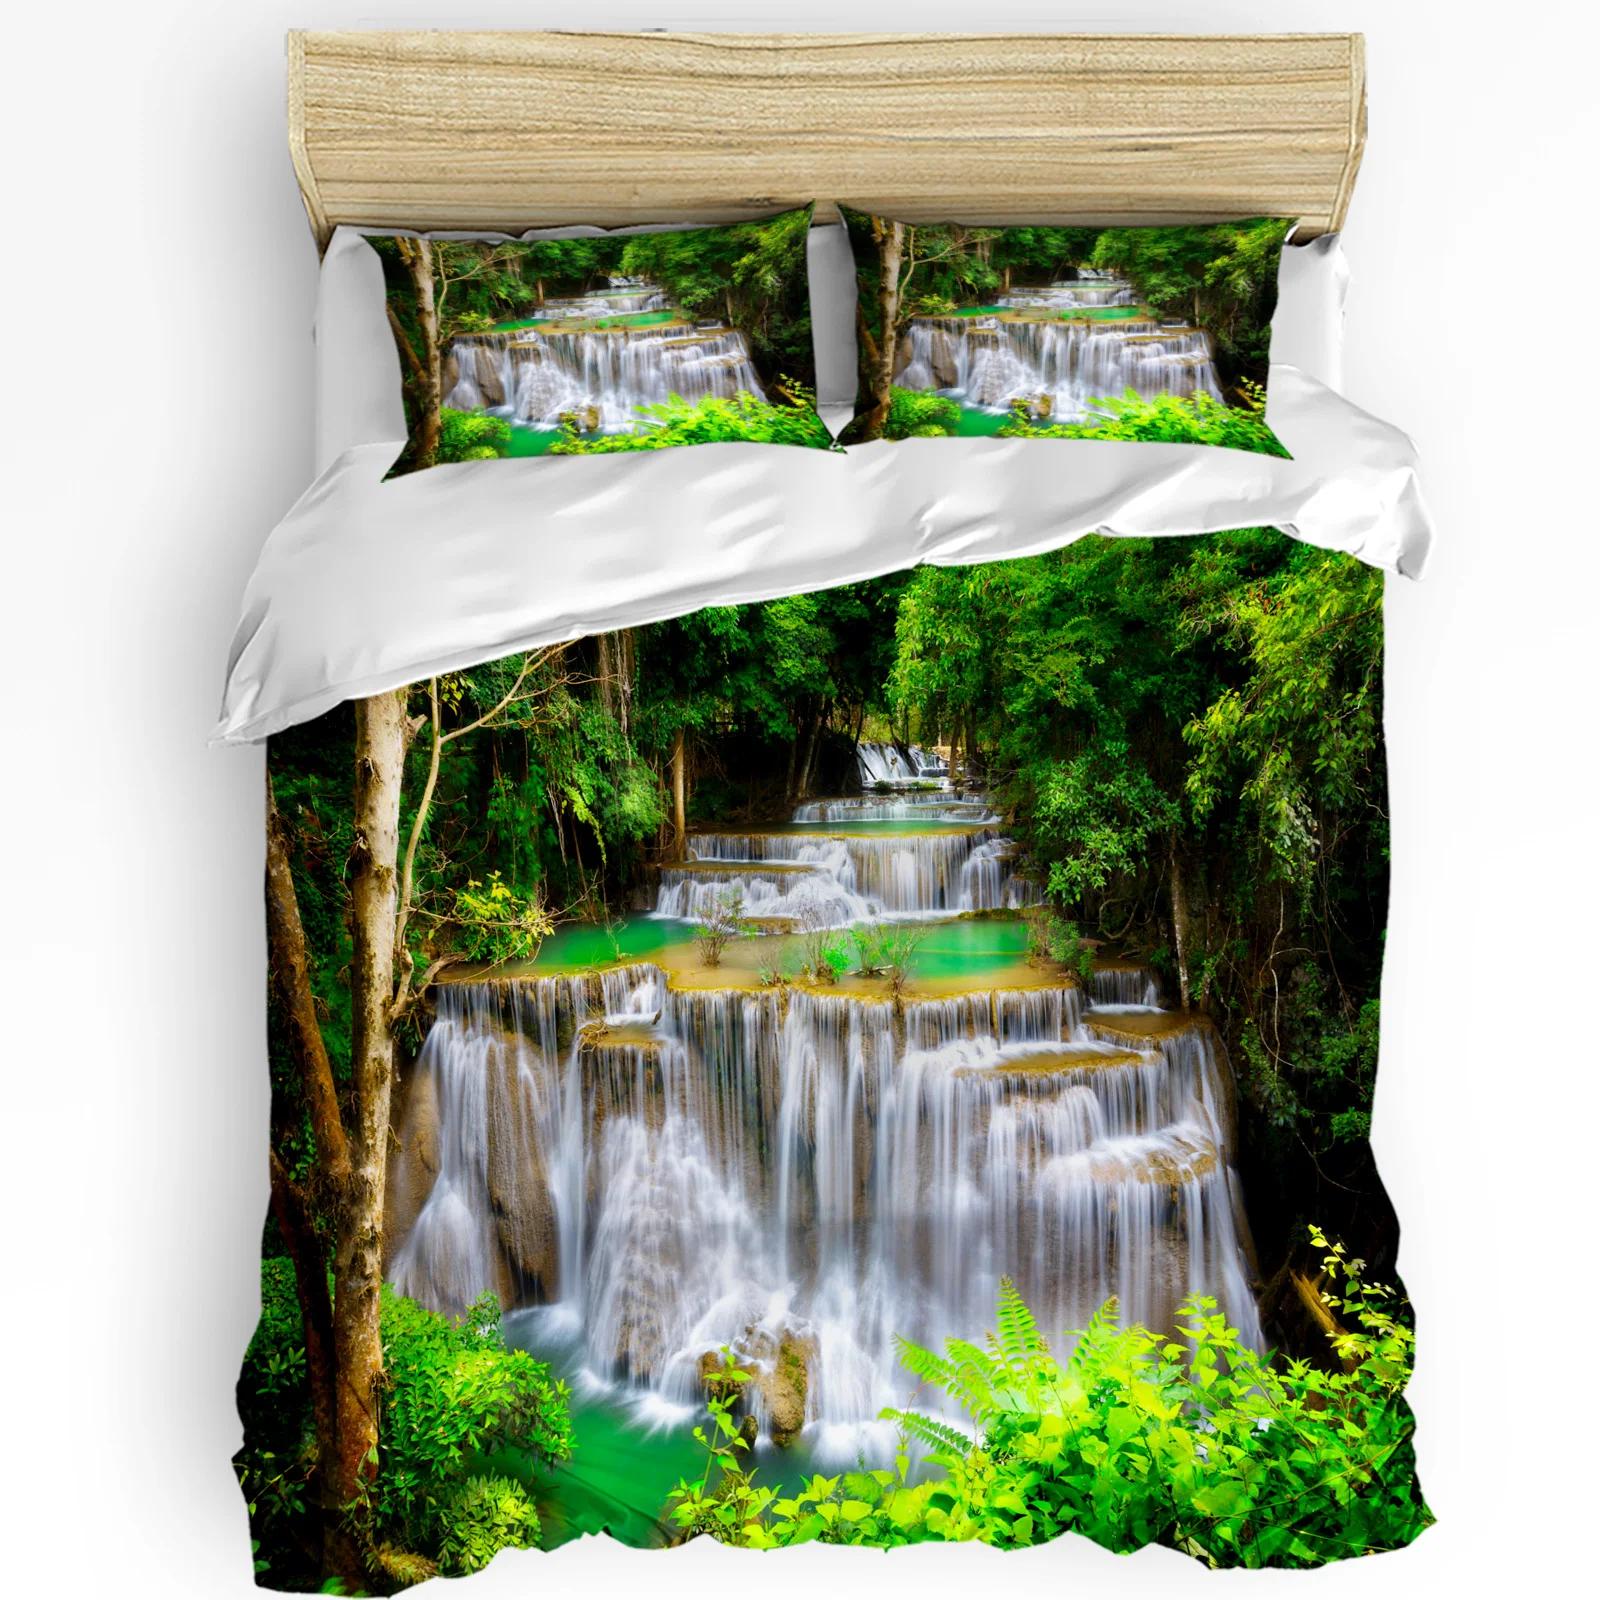 Waterfall Forest Nature Scenery Tropical Bedding Set 3pcs Duvet Cover Pillowcase Quilt Cover Double Bed Set Home Tex